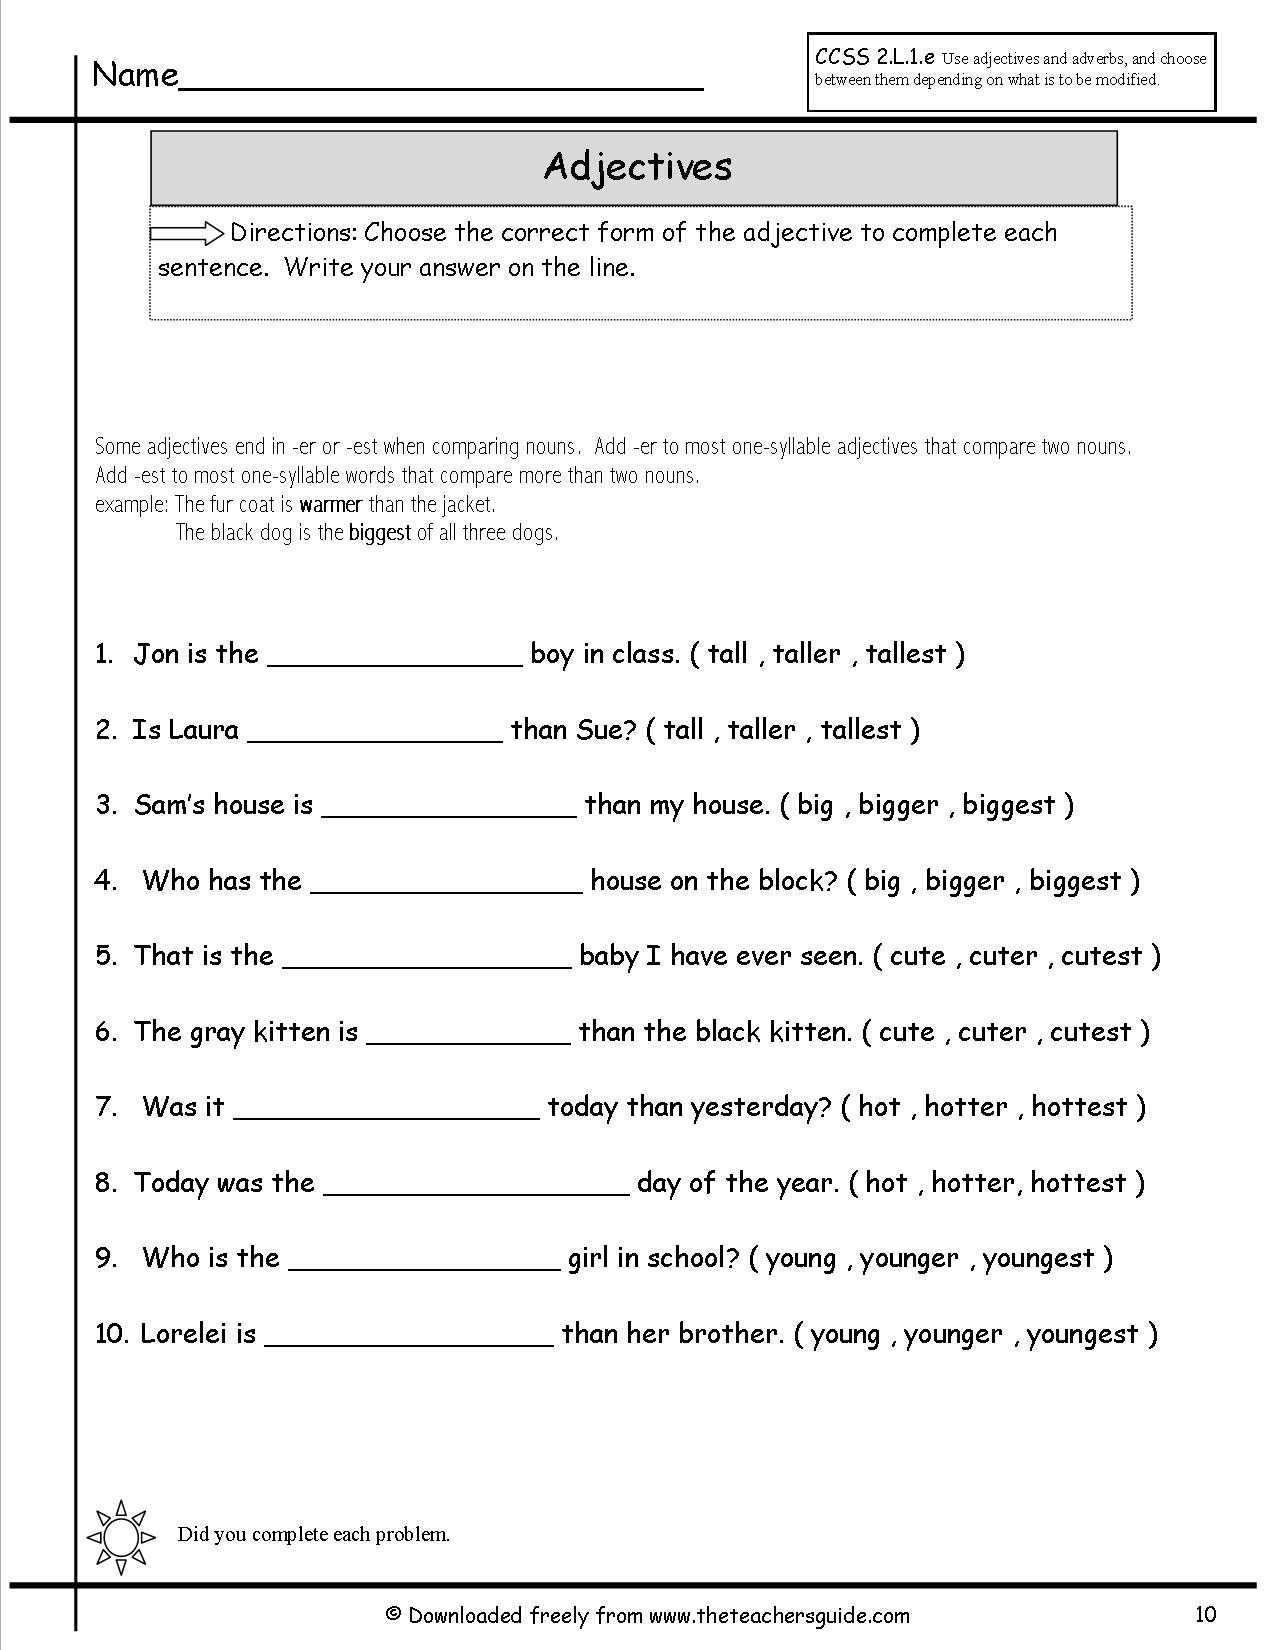 Adjectives Worksheet 3 Spanish Answers Along with Worksheet Lineo Articles Exercises with Answers Pdf English